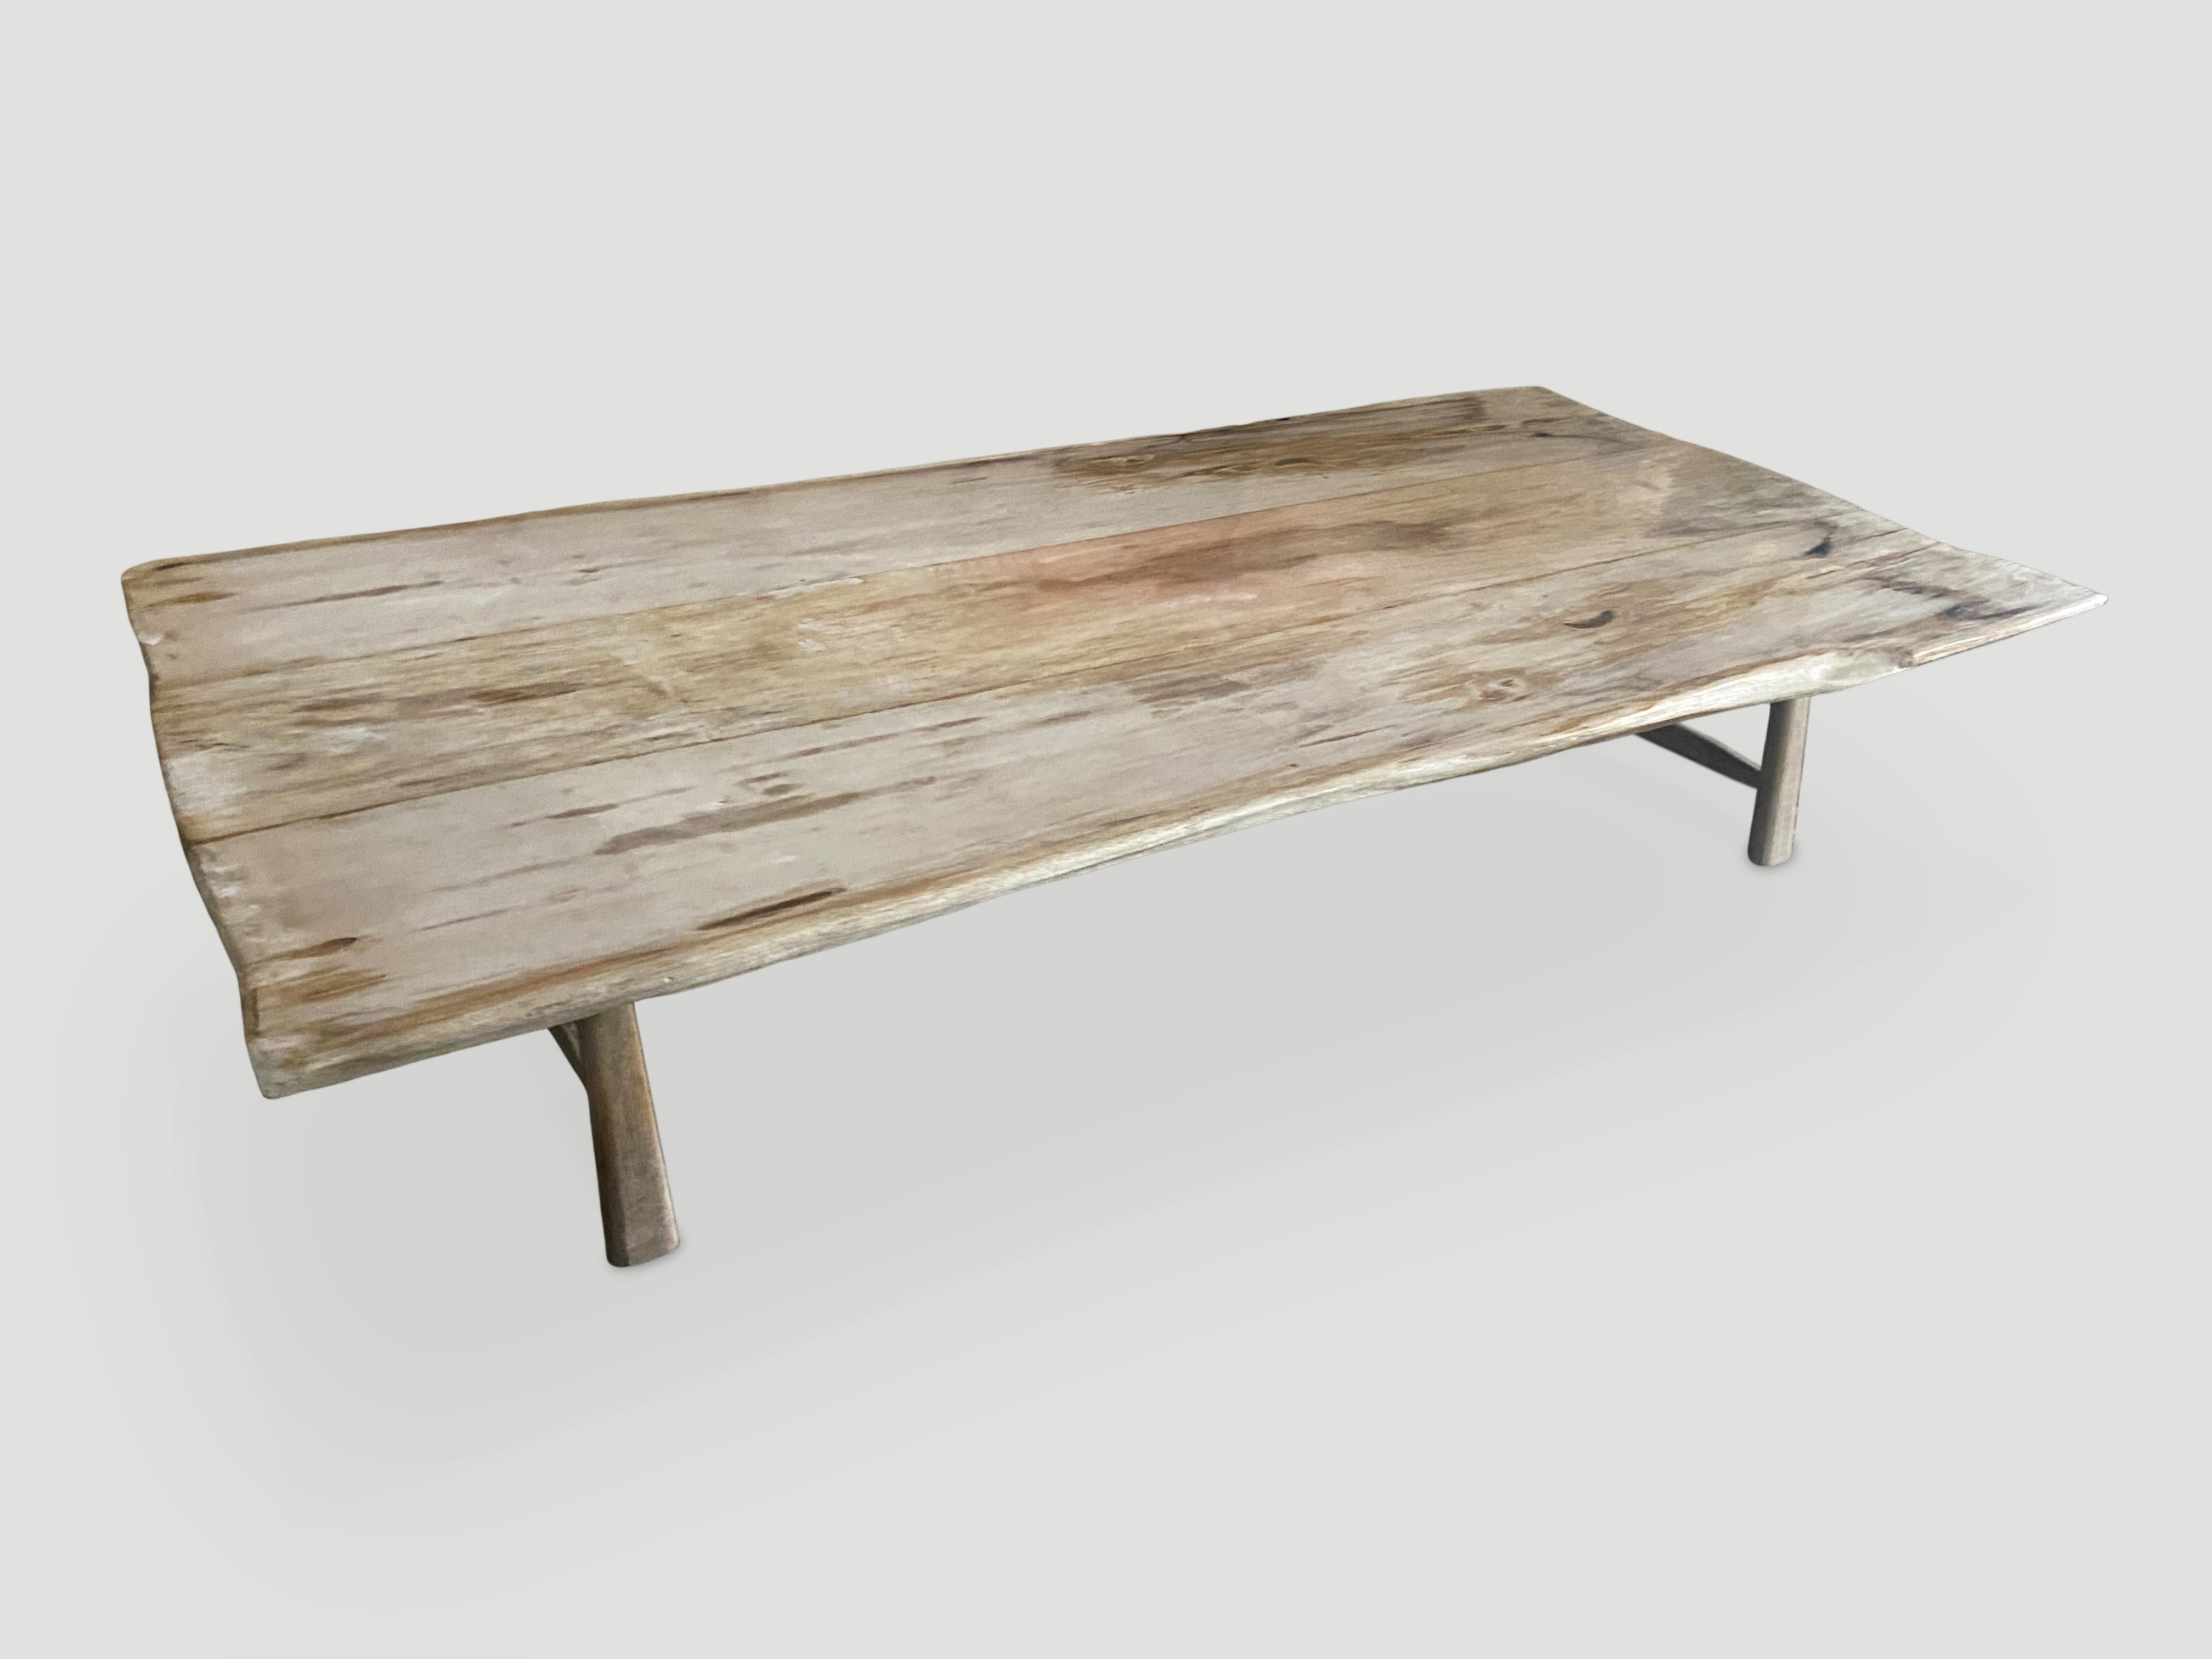 Andrianna Shamaris Live Edge Petrified Wood Coffee Table or Dining Table In Excellent Condition For Sale In New York, NY